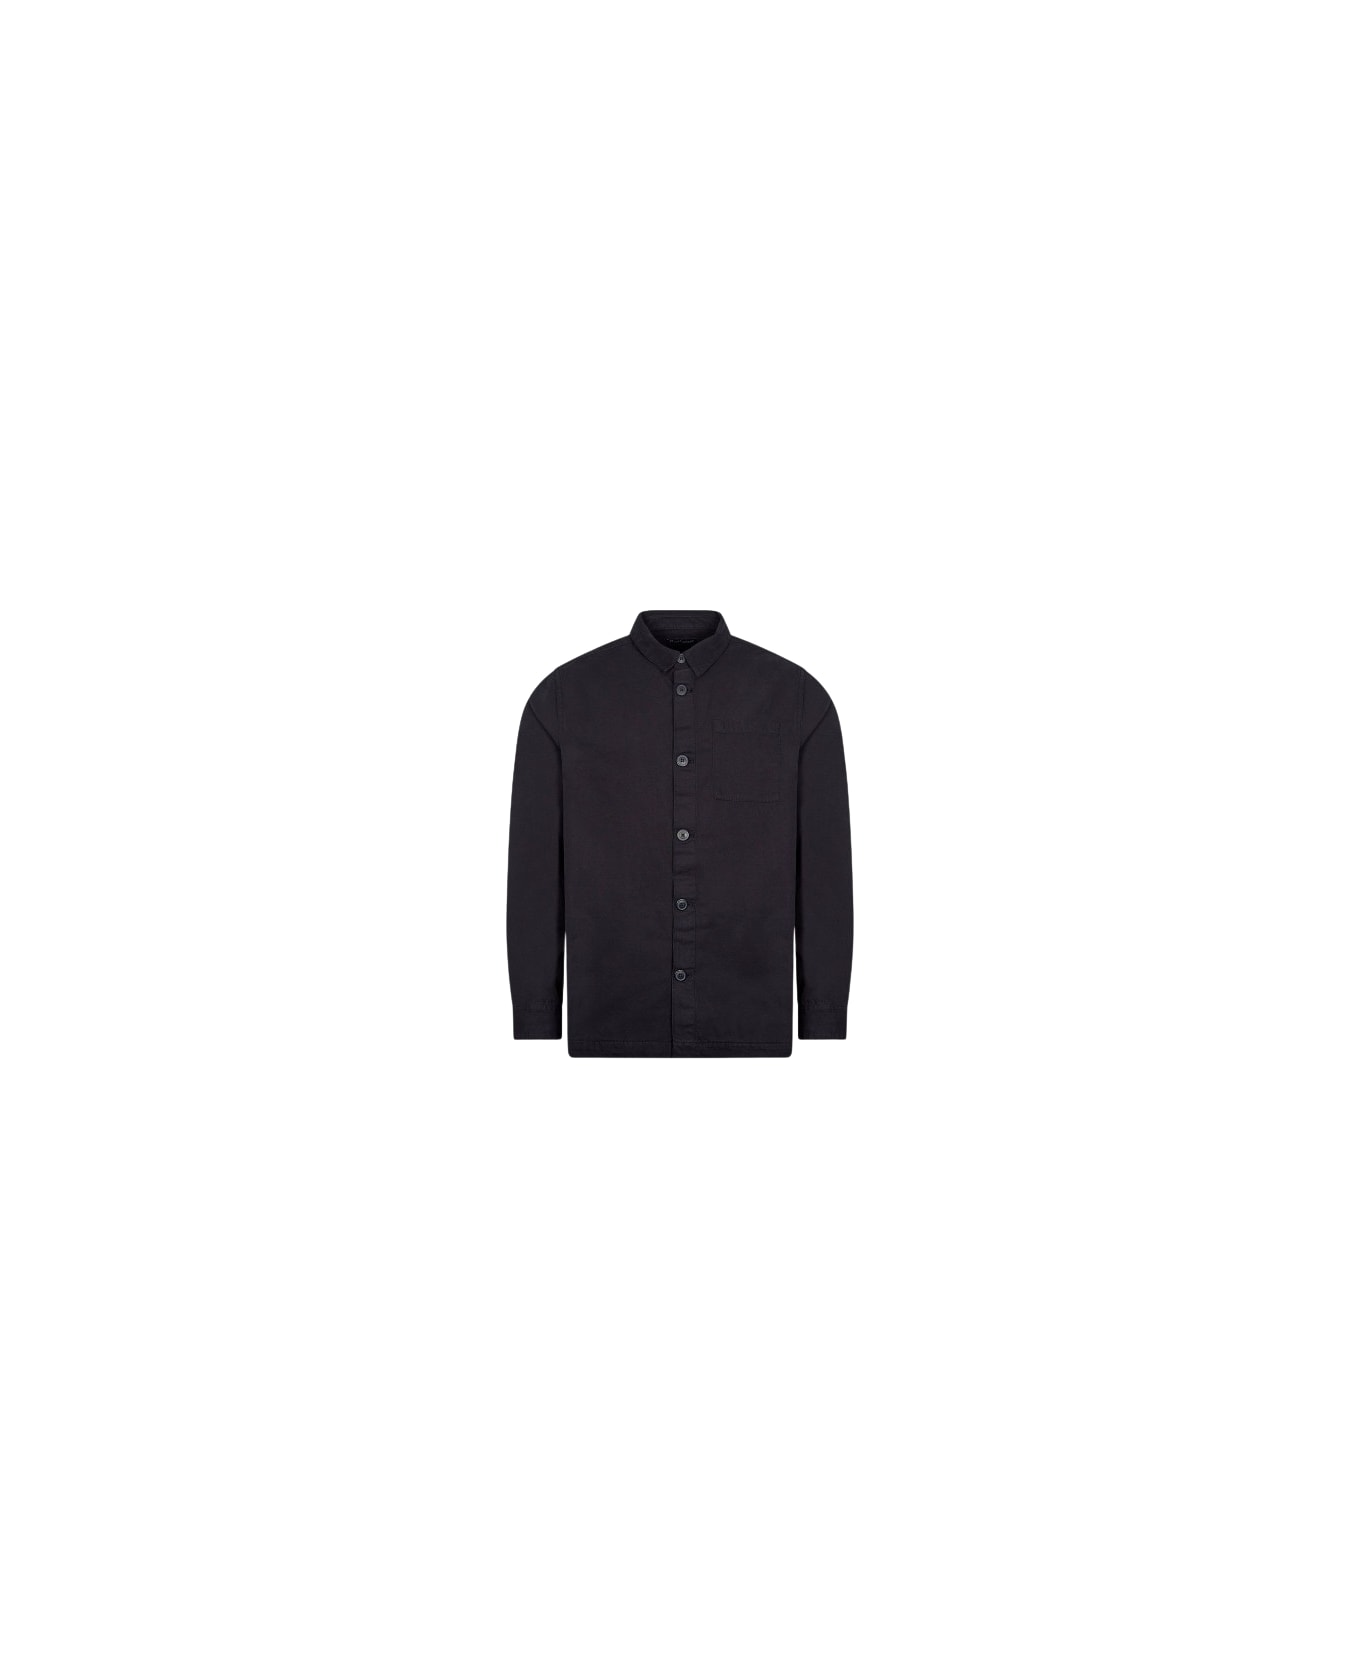 Barbour Washed Overshirt - Navy